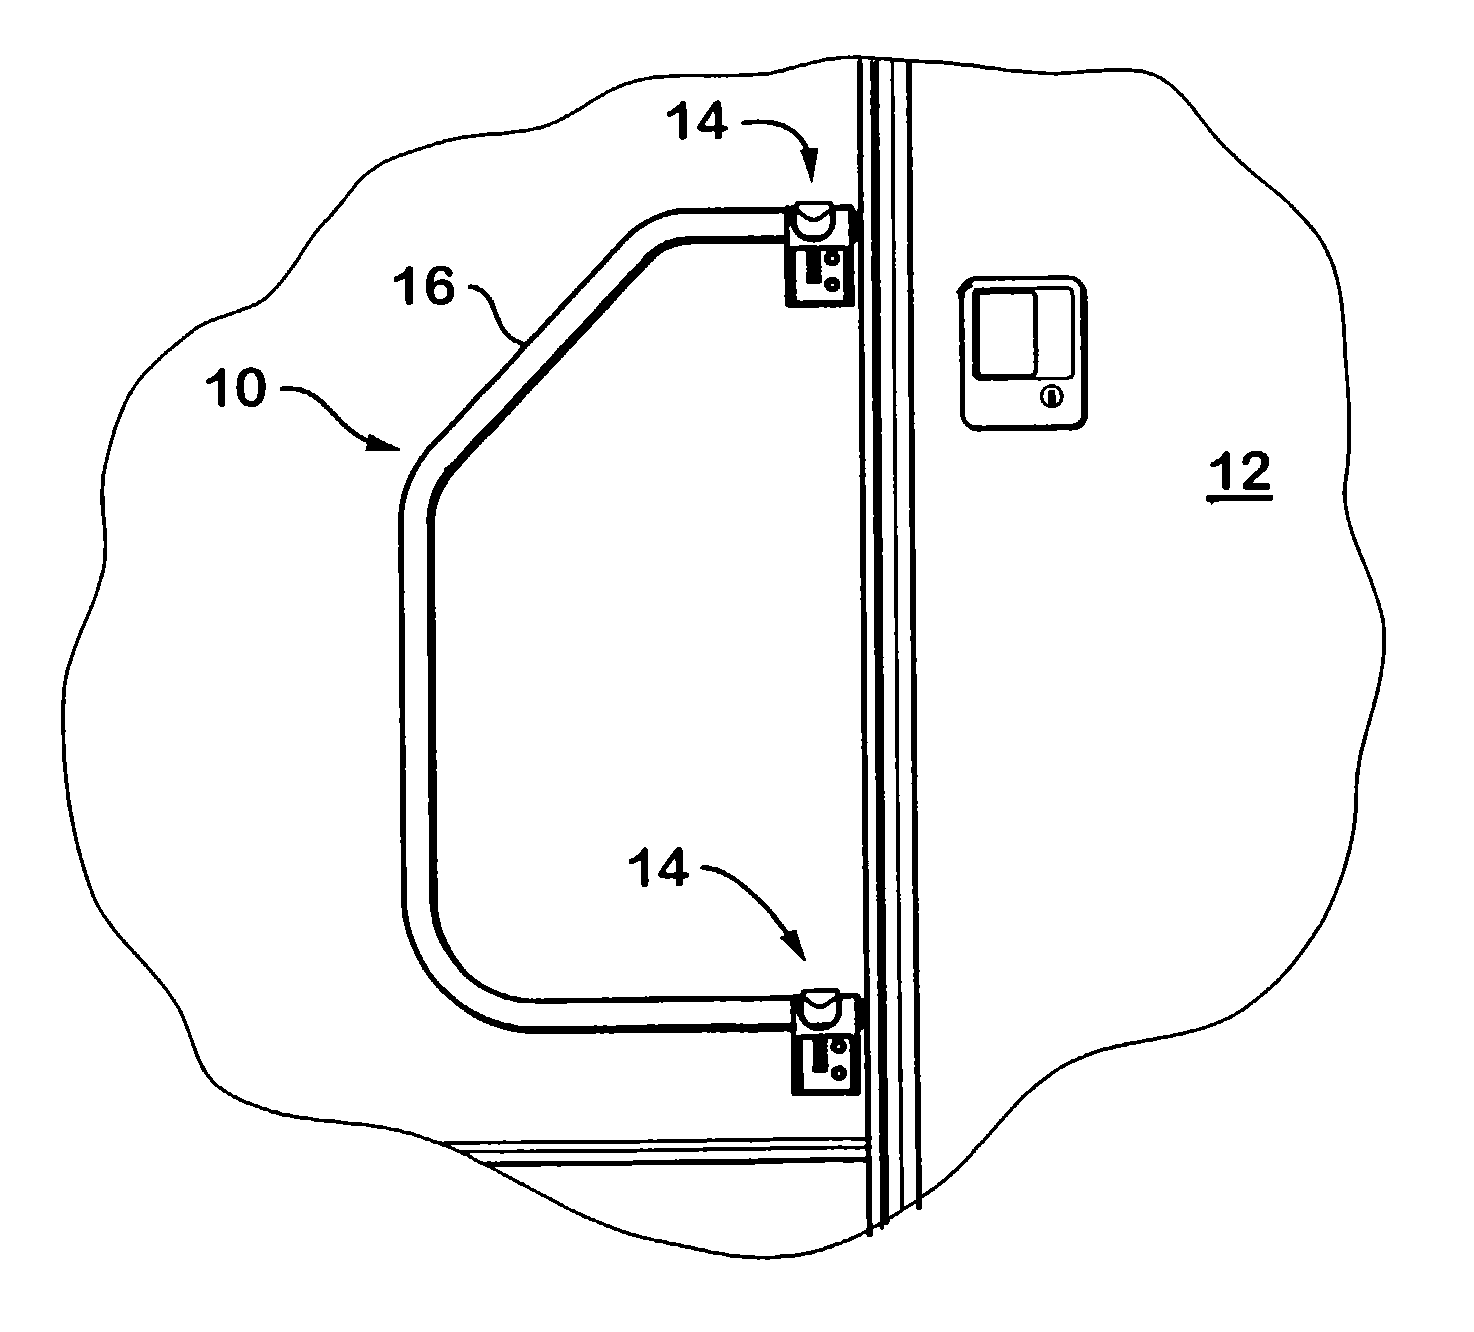 Method for installing a foldaway hand rail to a vehicle